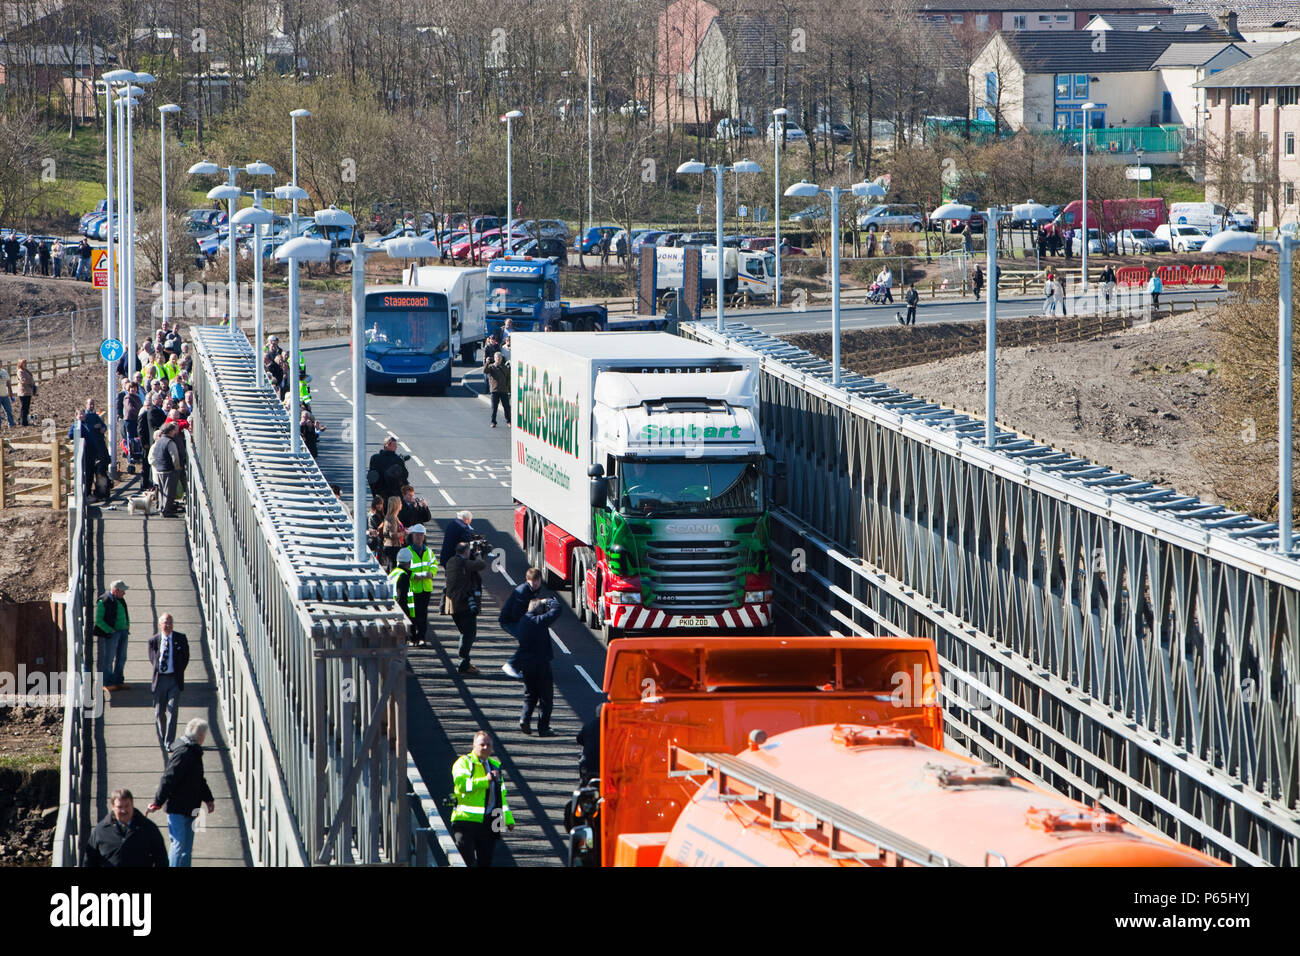 This Eddie Stobart lorry was chosen as the first vehicle to cross the new Workington bridge crossing the River Derwent, at the official opening. The b Stock Photo